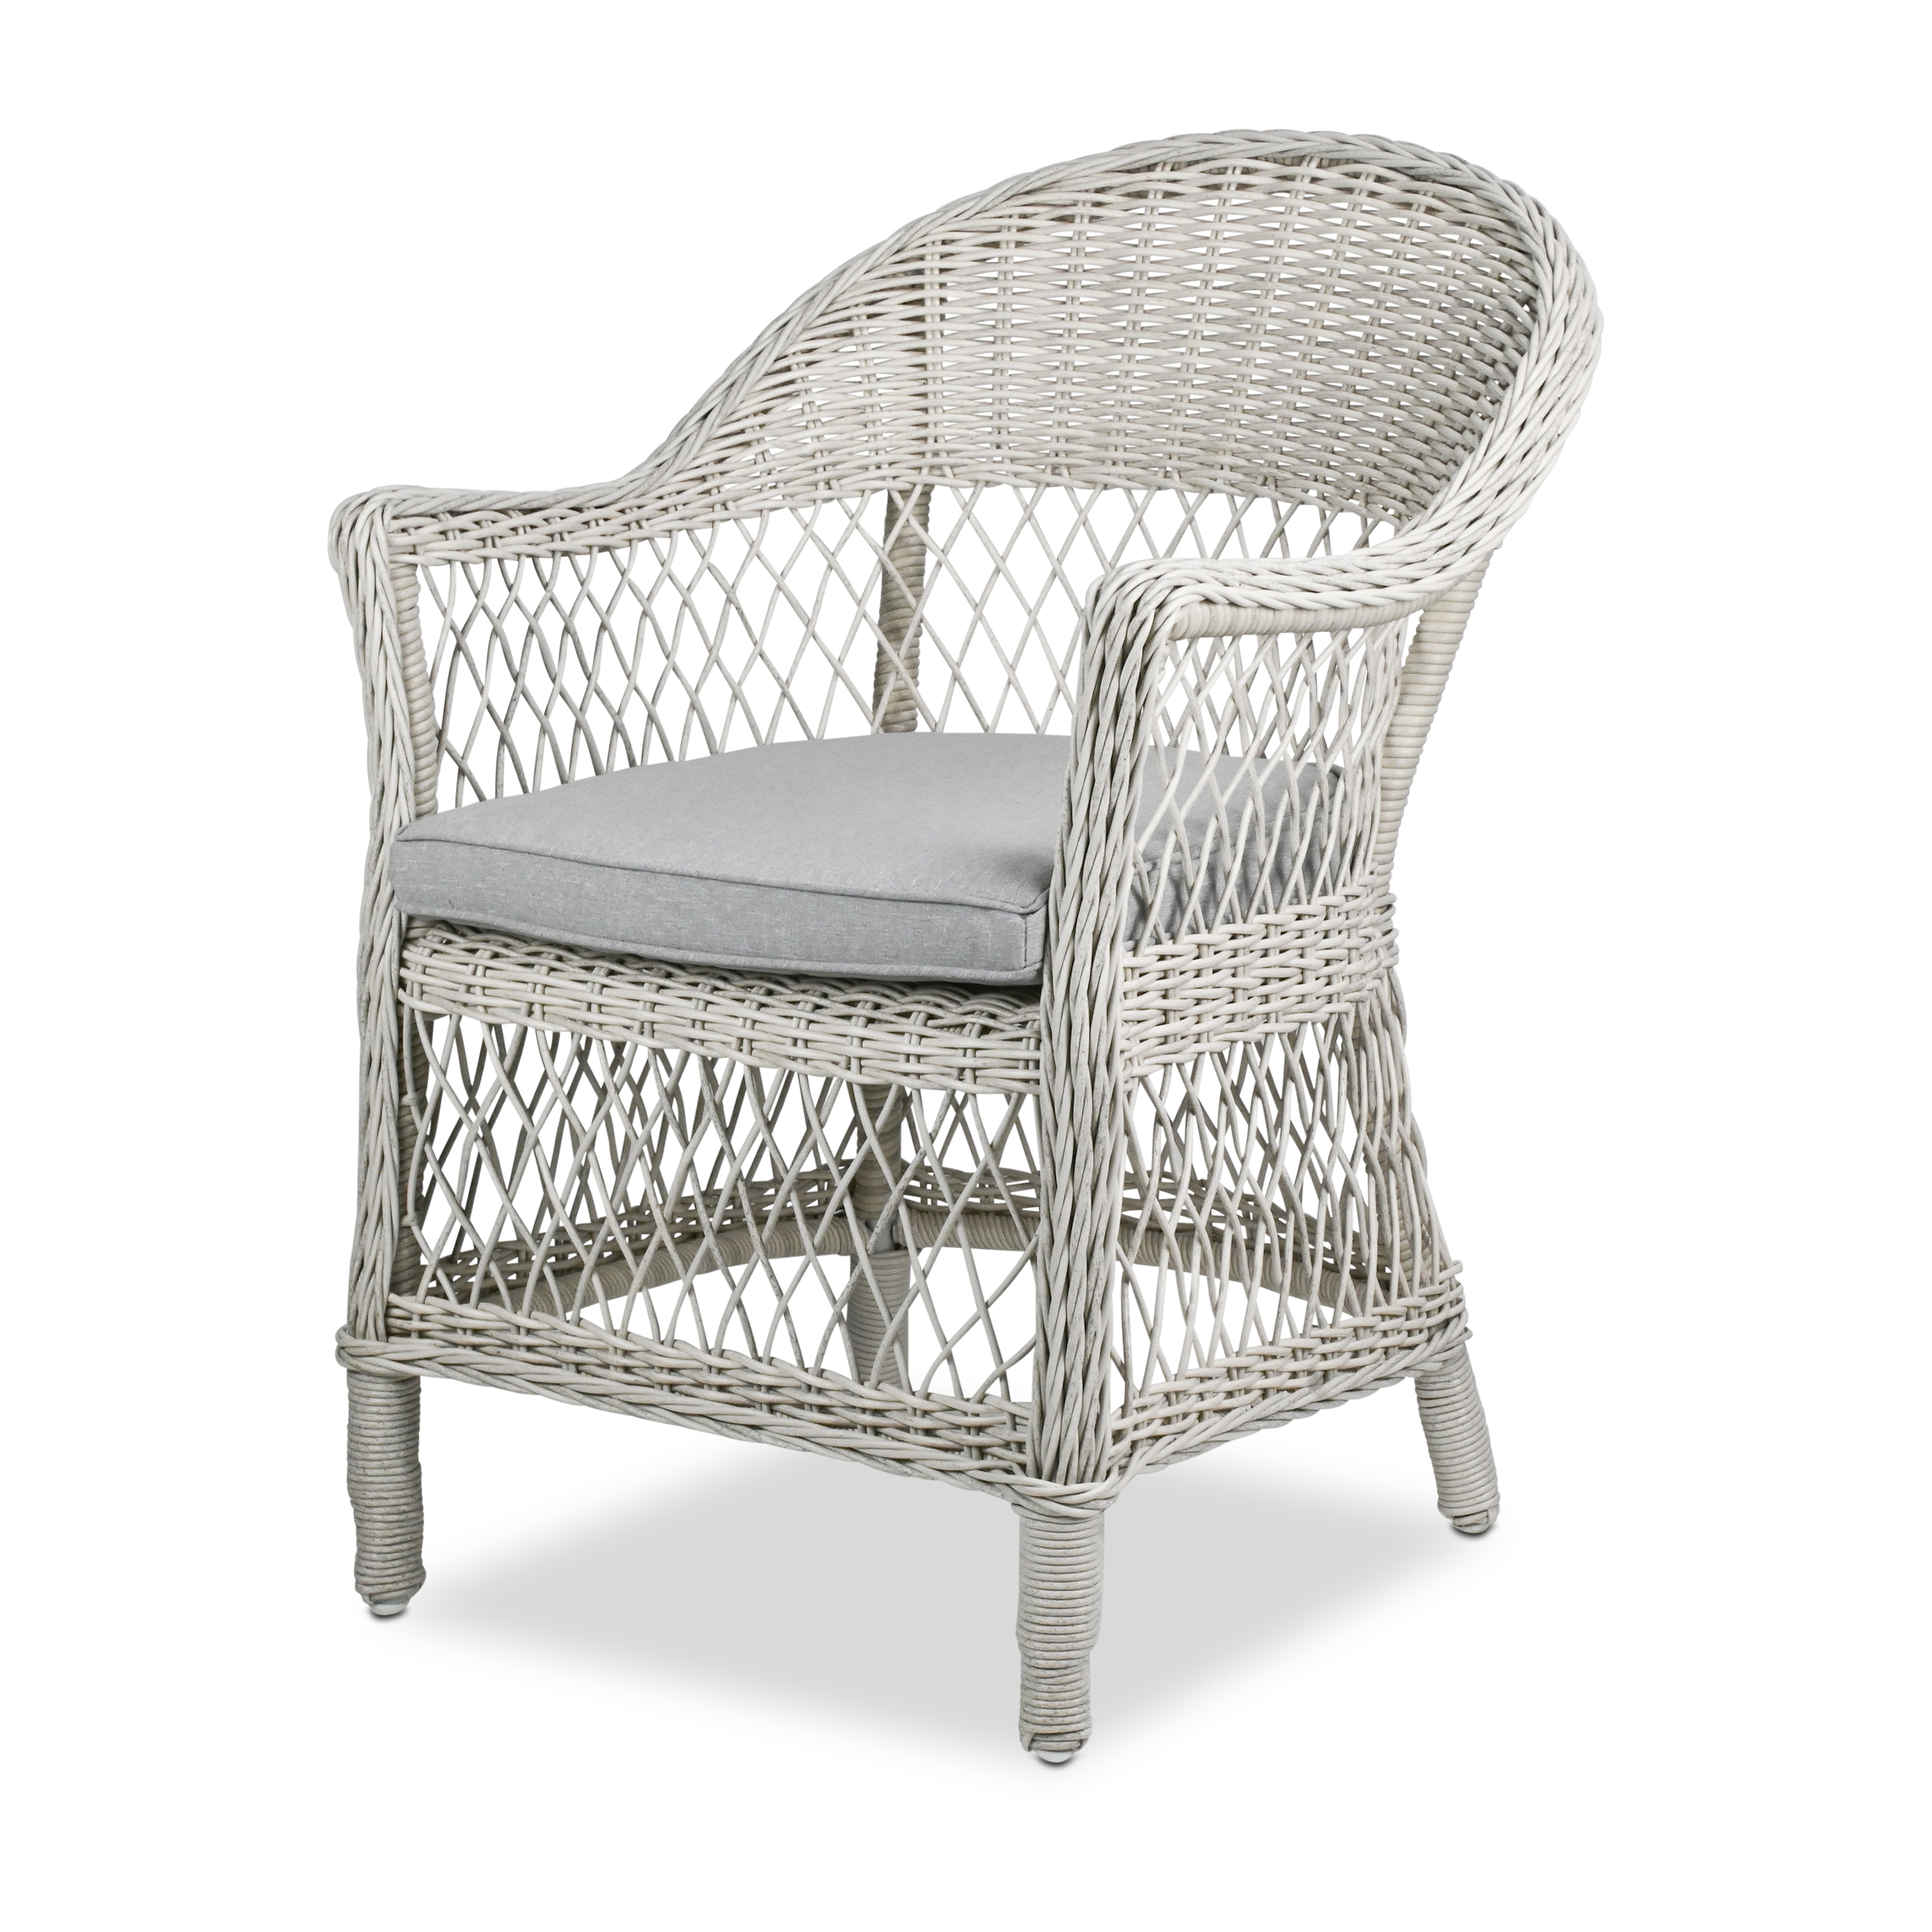 Hamptons Dining Chair in Surfmist Wicker and Dune Spunpoly Cushions